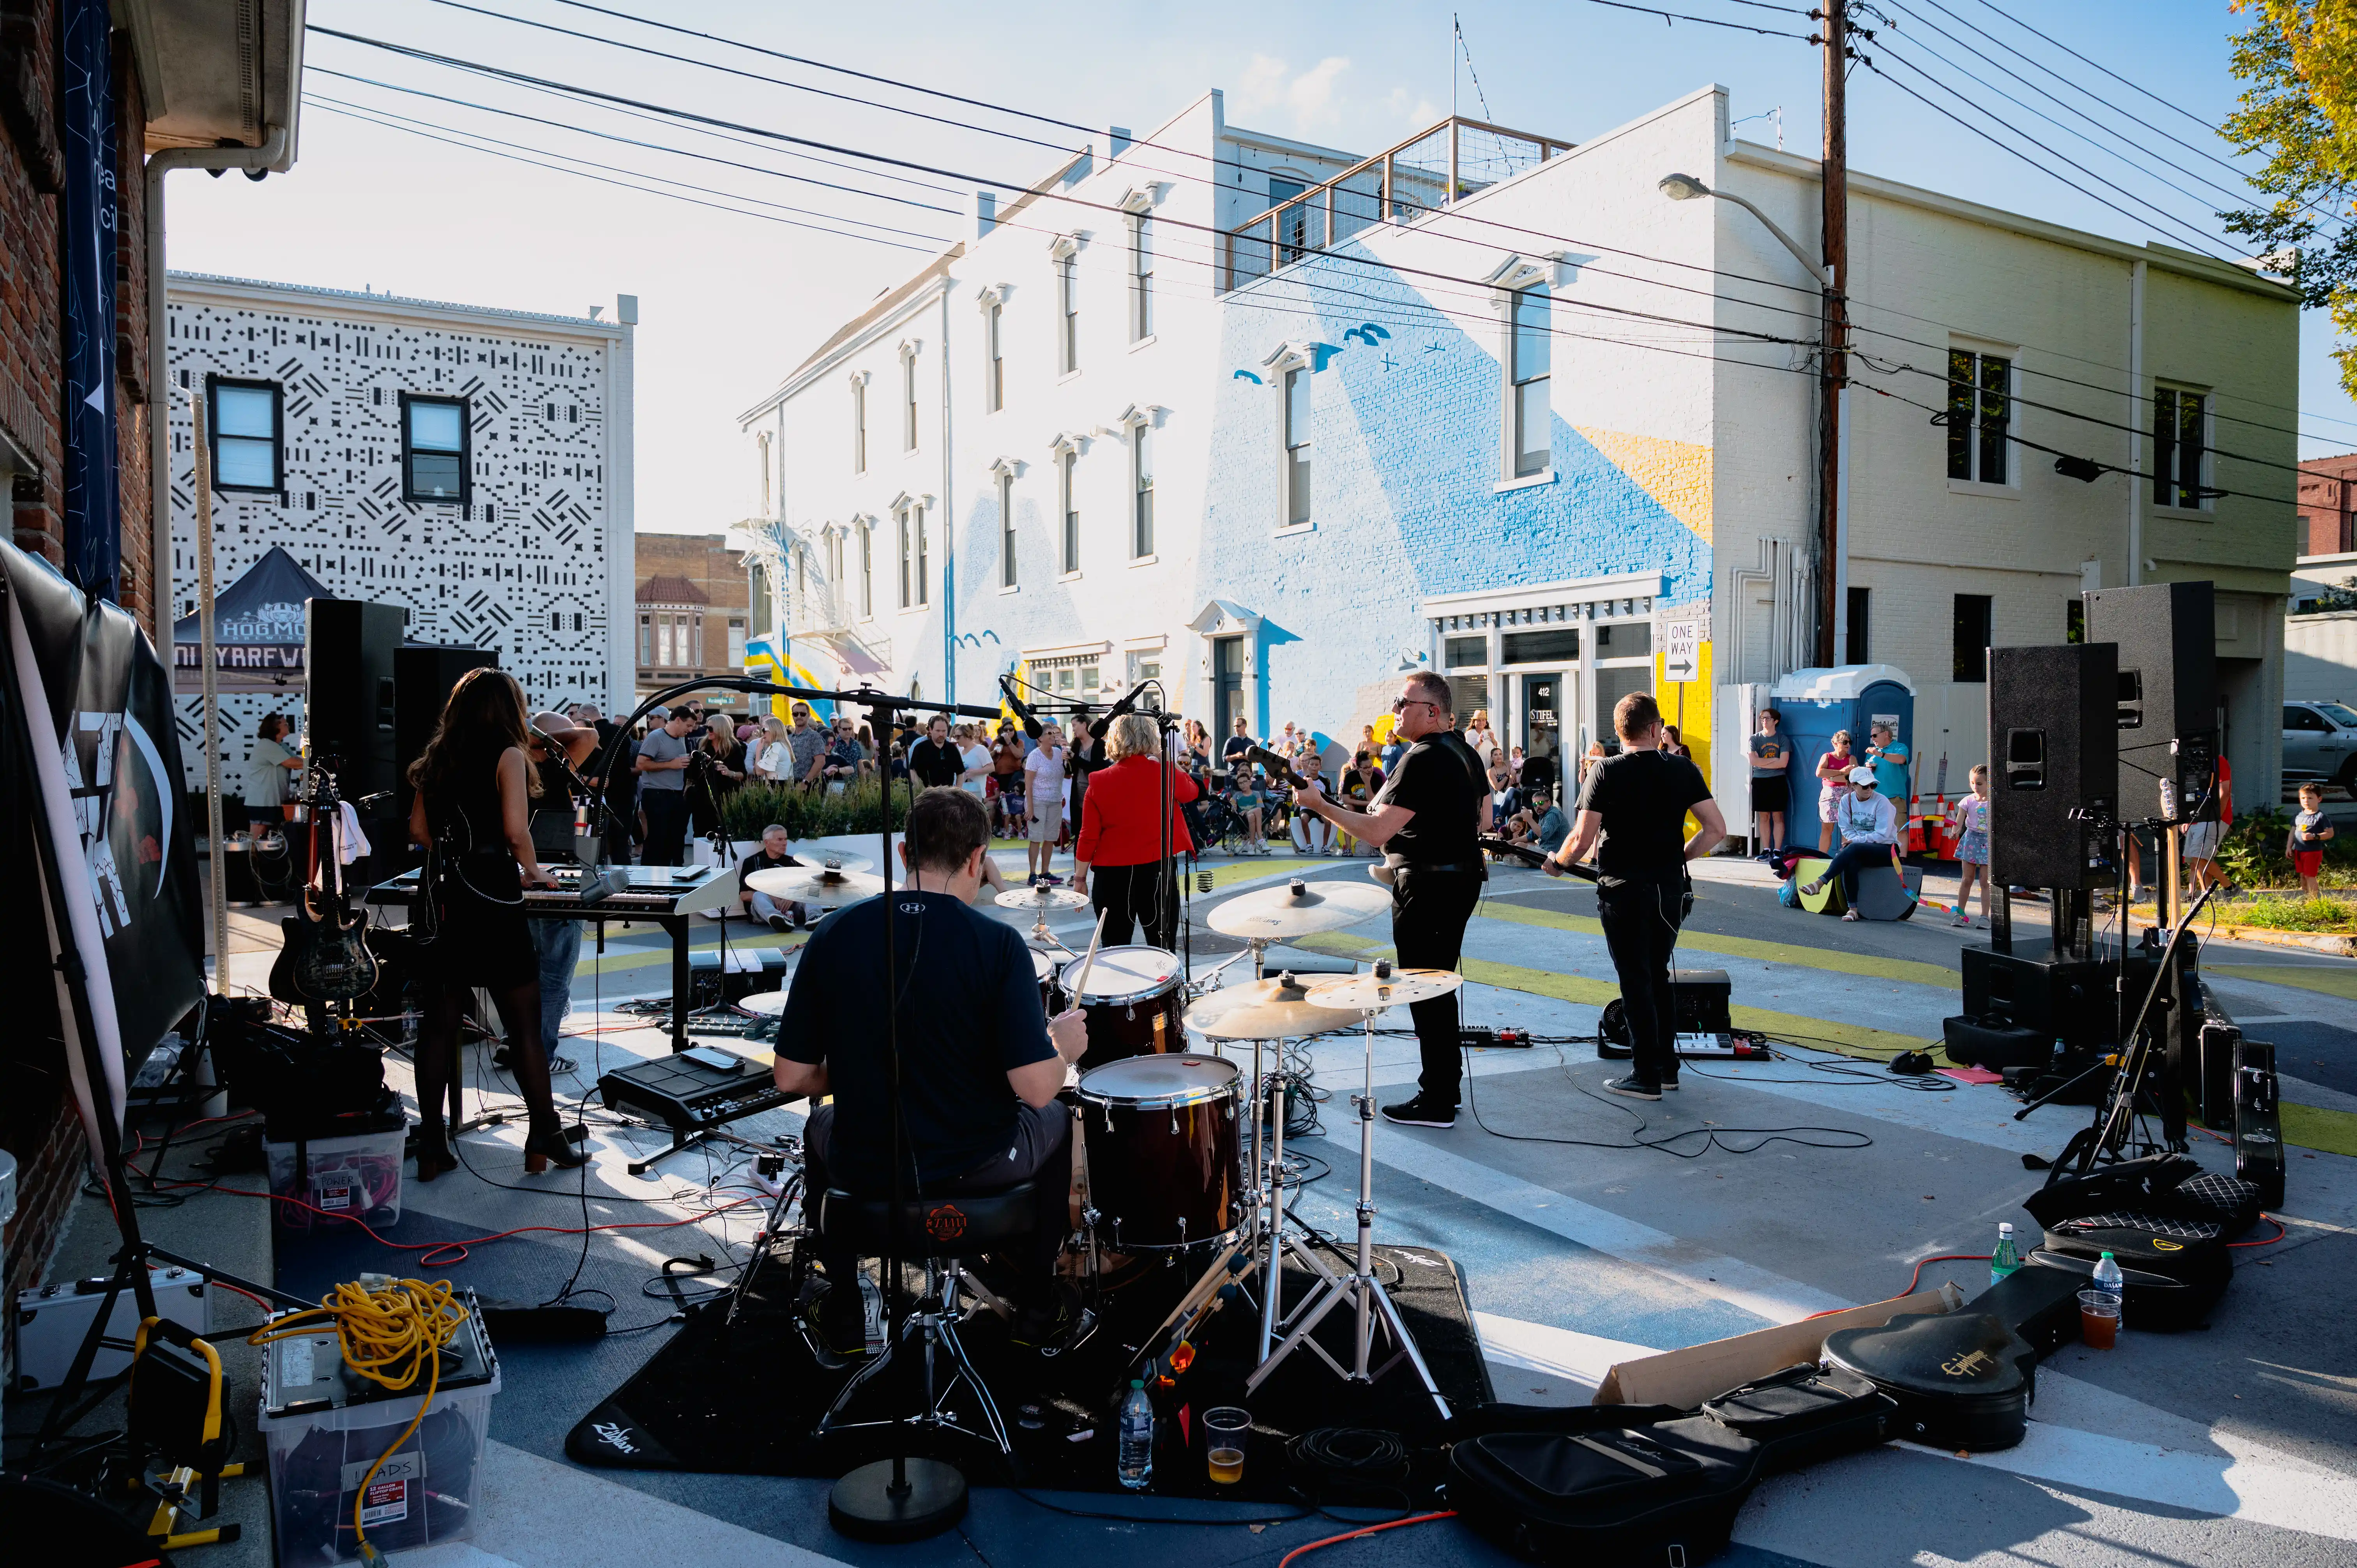 A live band performs on a street stage in front of an audience during a sunny outdoor event, with buildings and urban street art in the background.